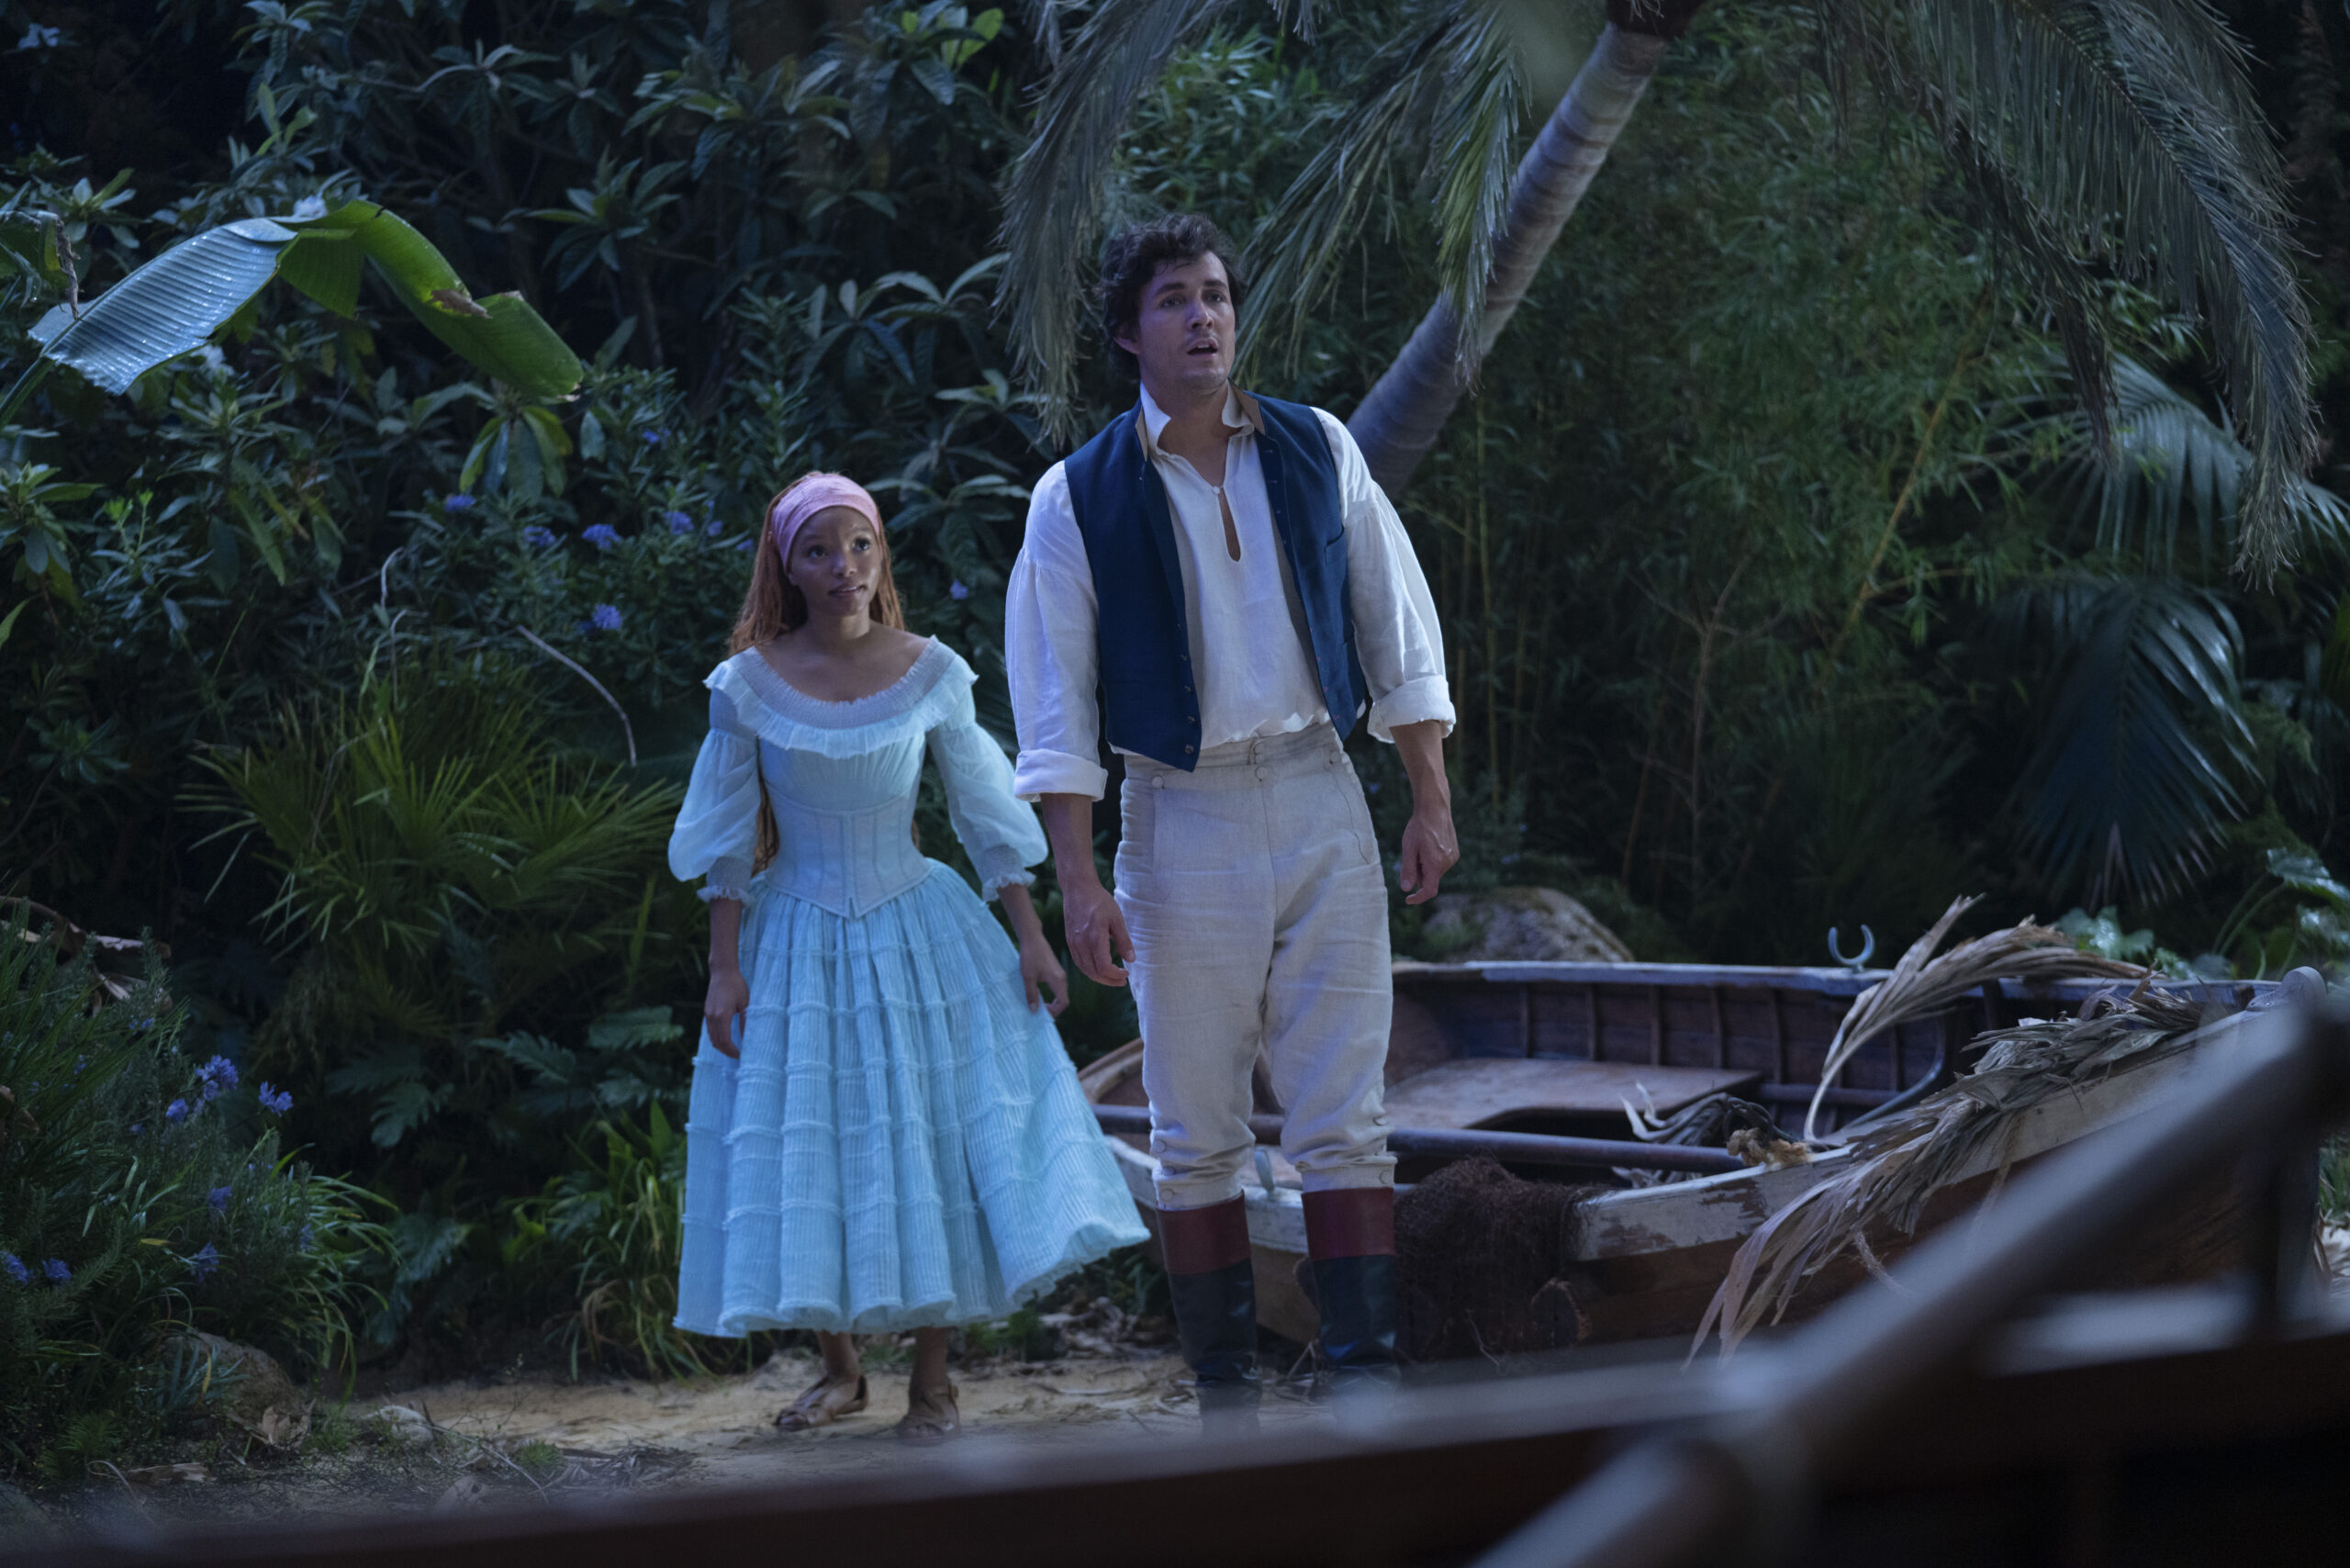 (L-R): Halle Bailey as Ariel and Jonah Hauer-King as Prince Eric in Disney's live-action THE LITTLE MERMAID. Photo by Giles Keyte. © 2023 Disney Enterprises, Inc. All Rights Reserved.